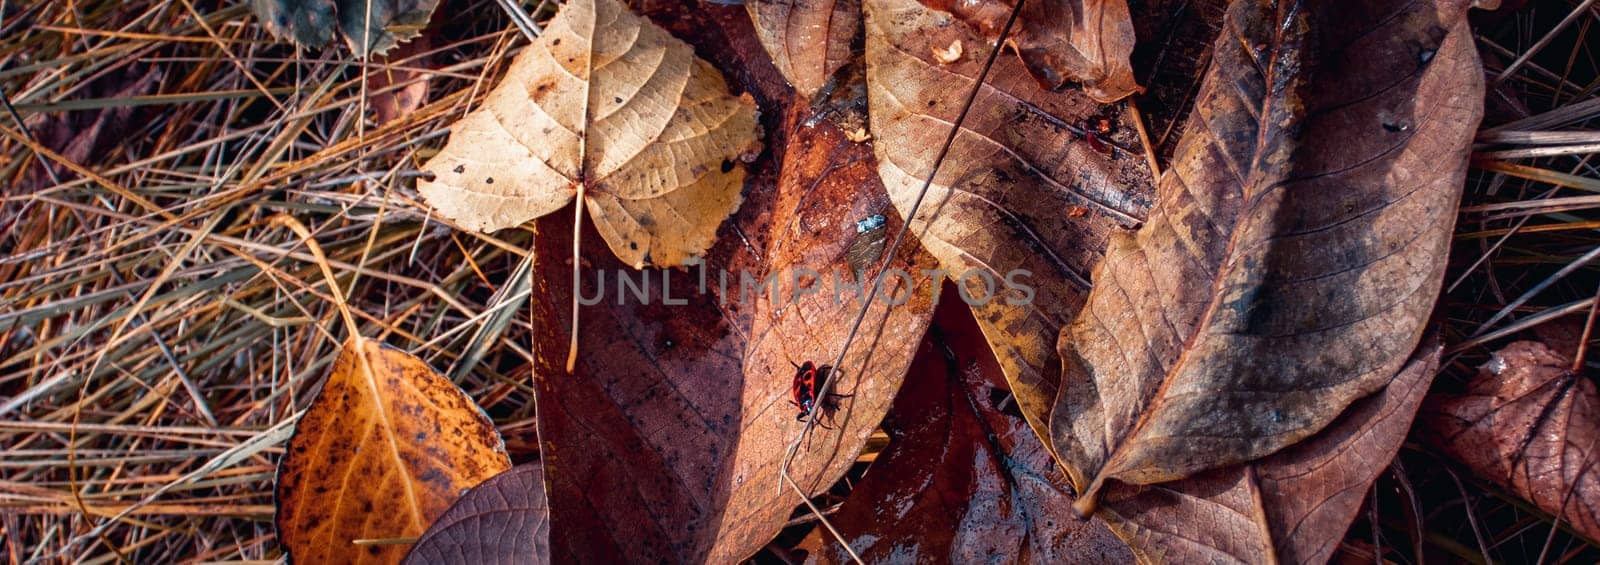 Close up autumnal leaves on ground with dew concept photo. Autumn colorful background with bug. by _Nataly_Nati_